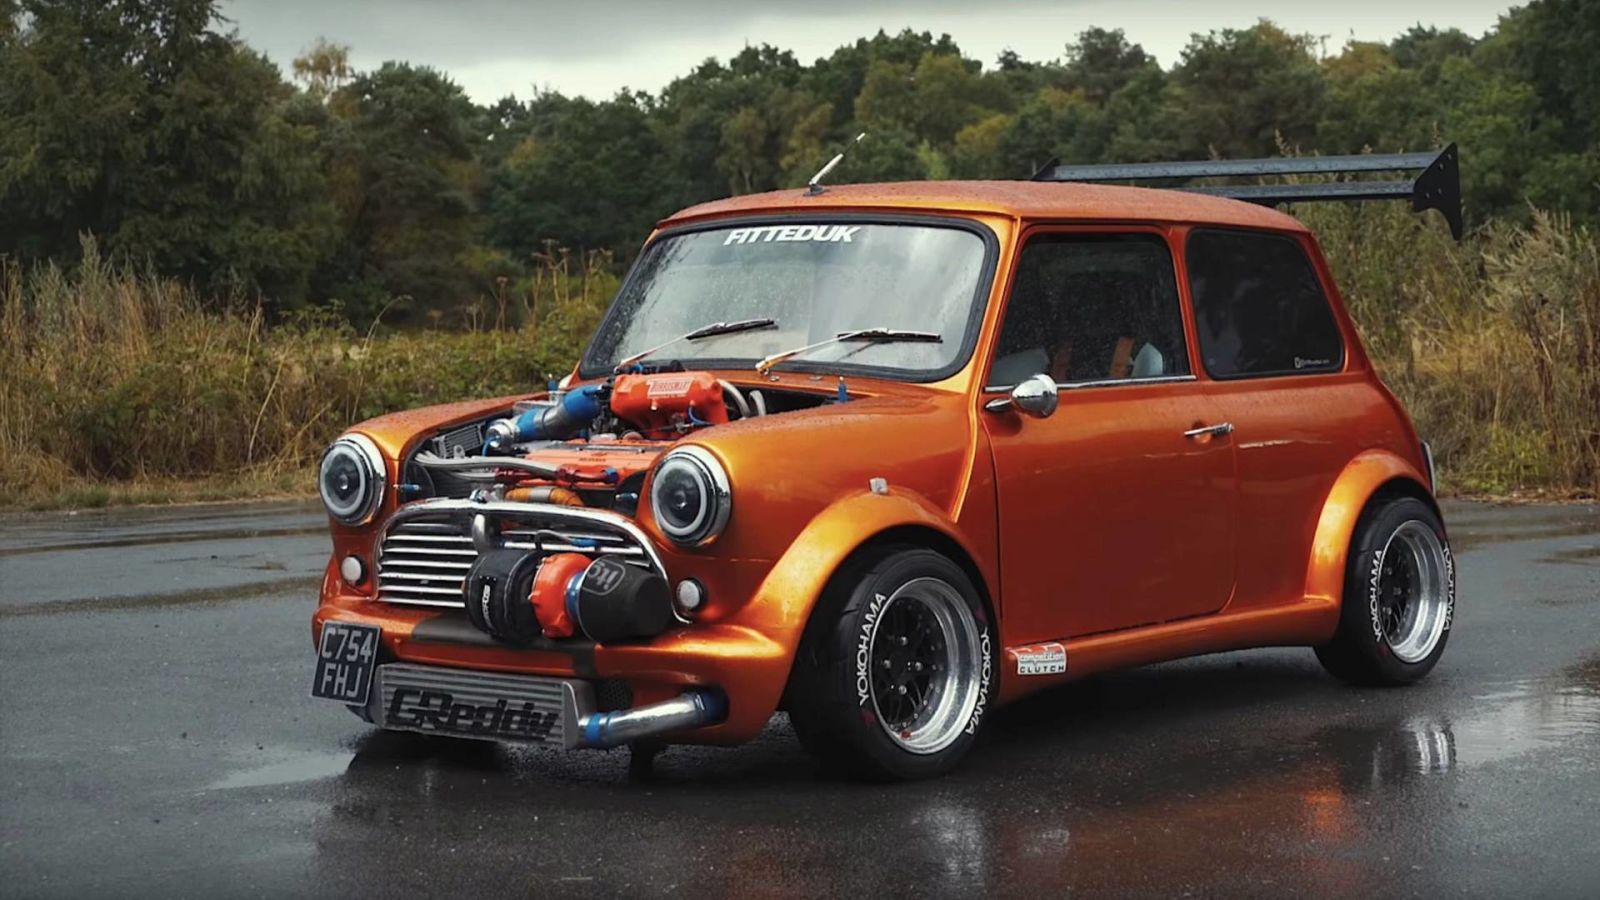 source: motor1.com - pictured: a lightly modified Mini